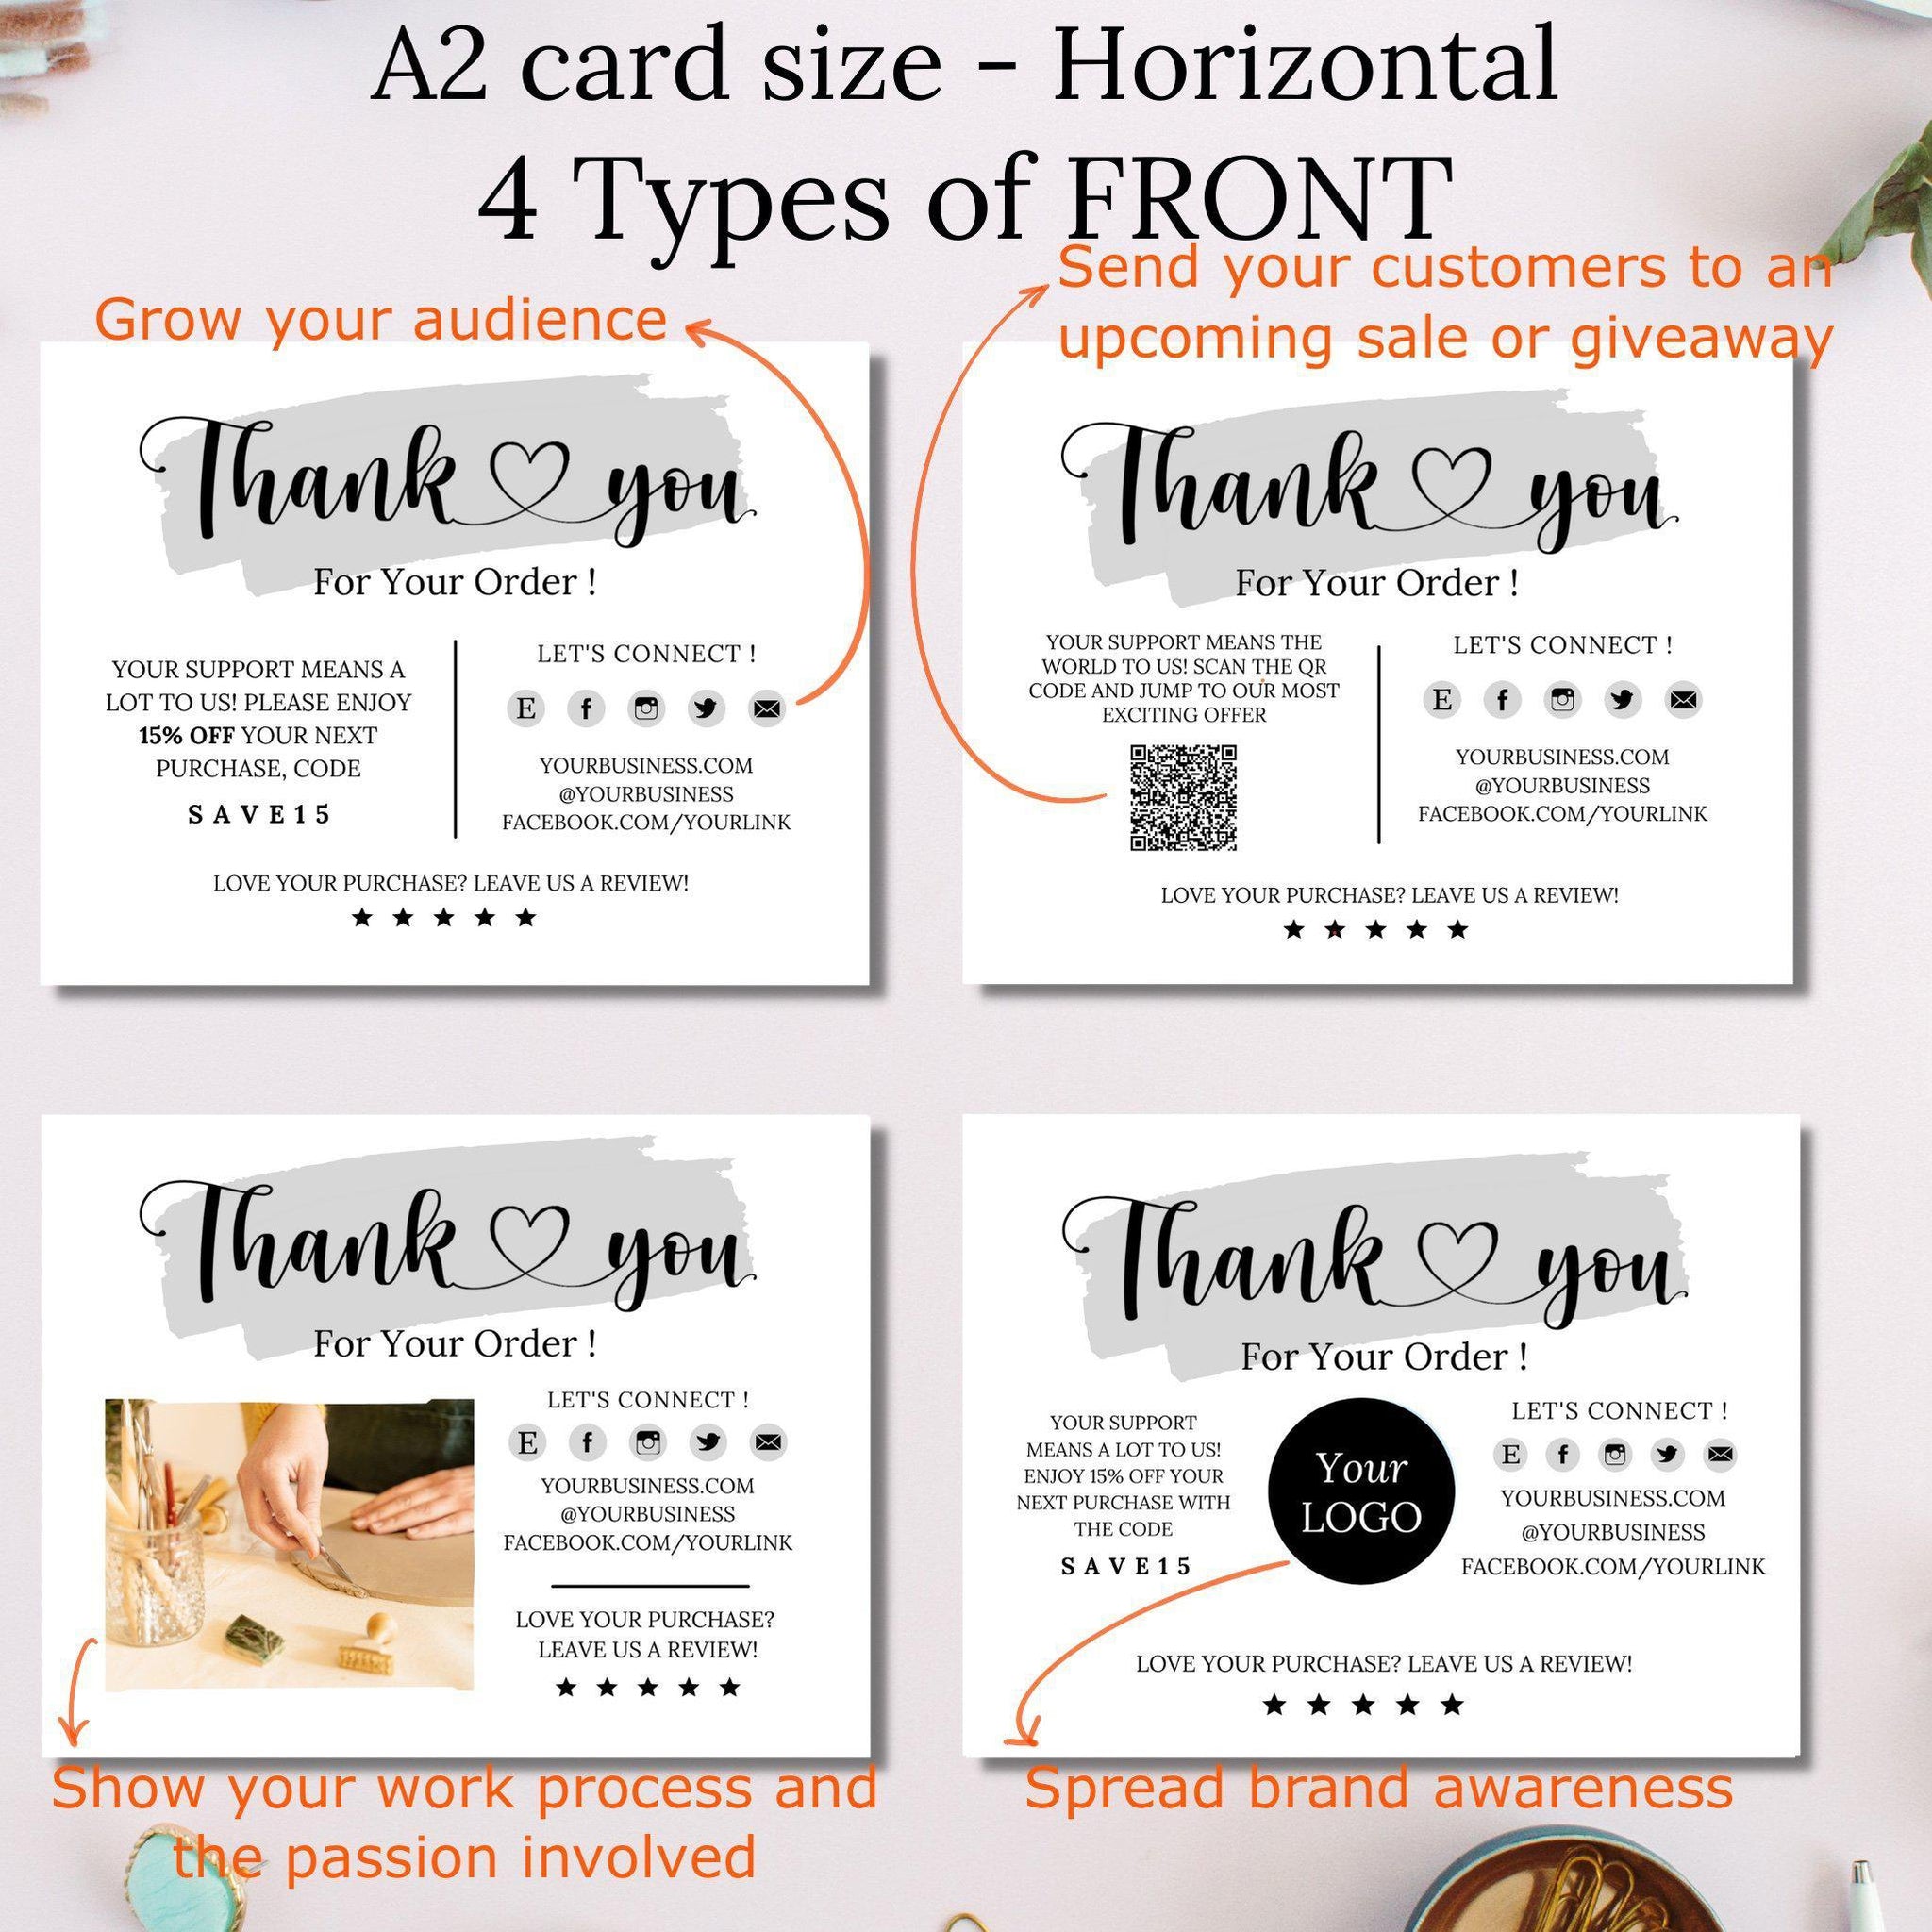 Thank you for your purchase cards